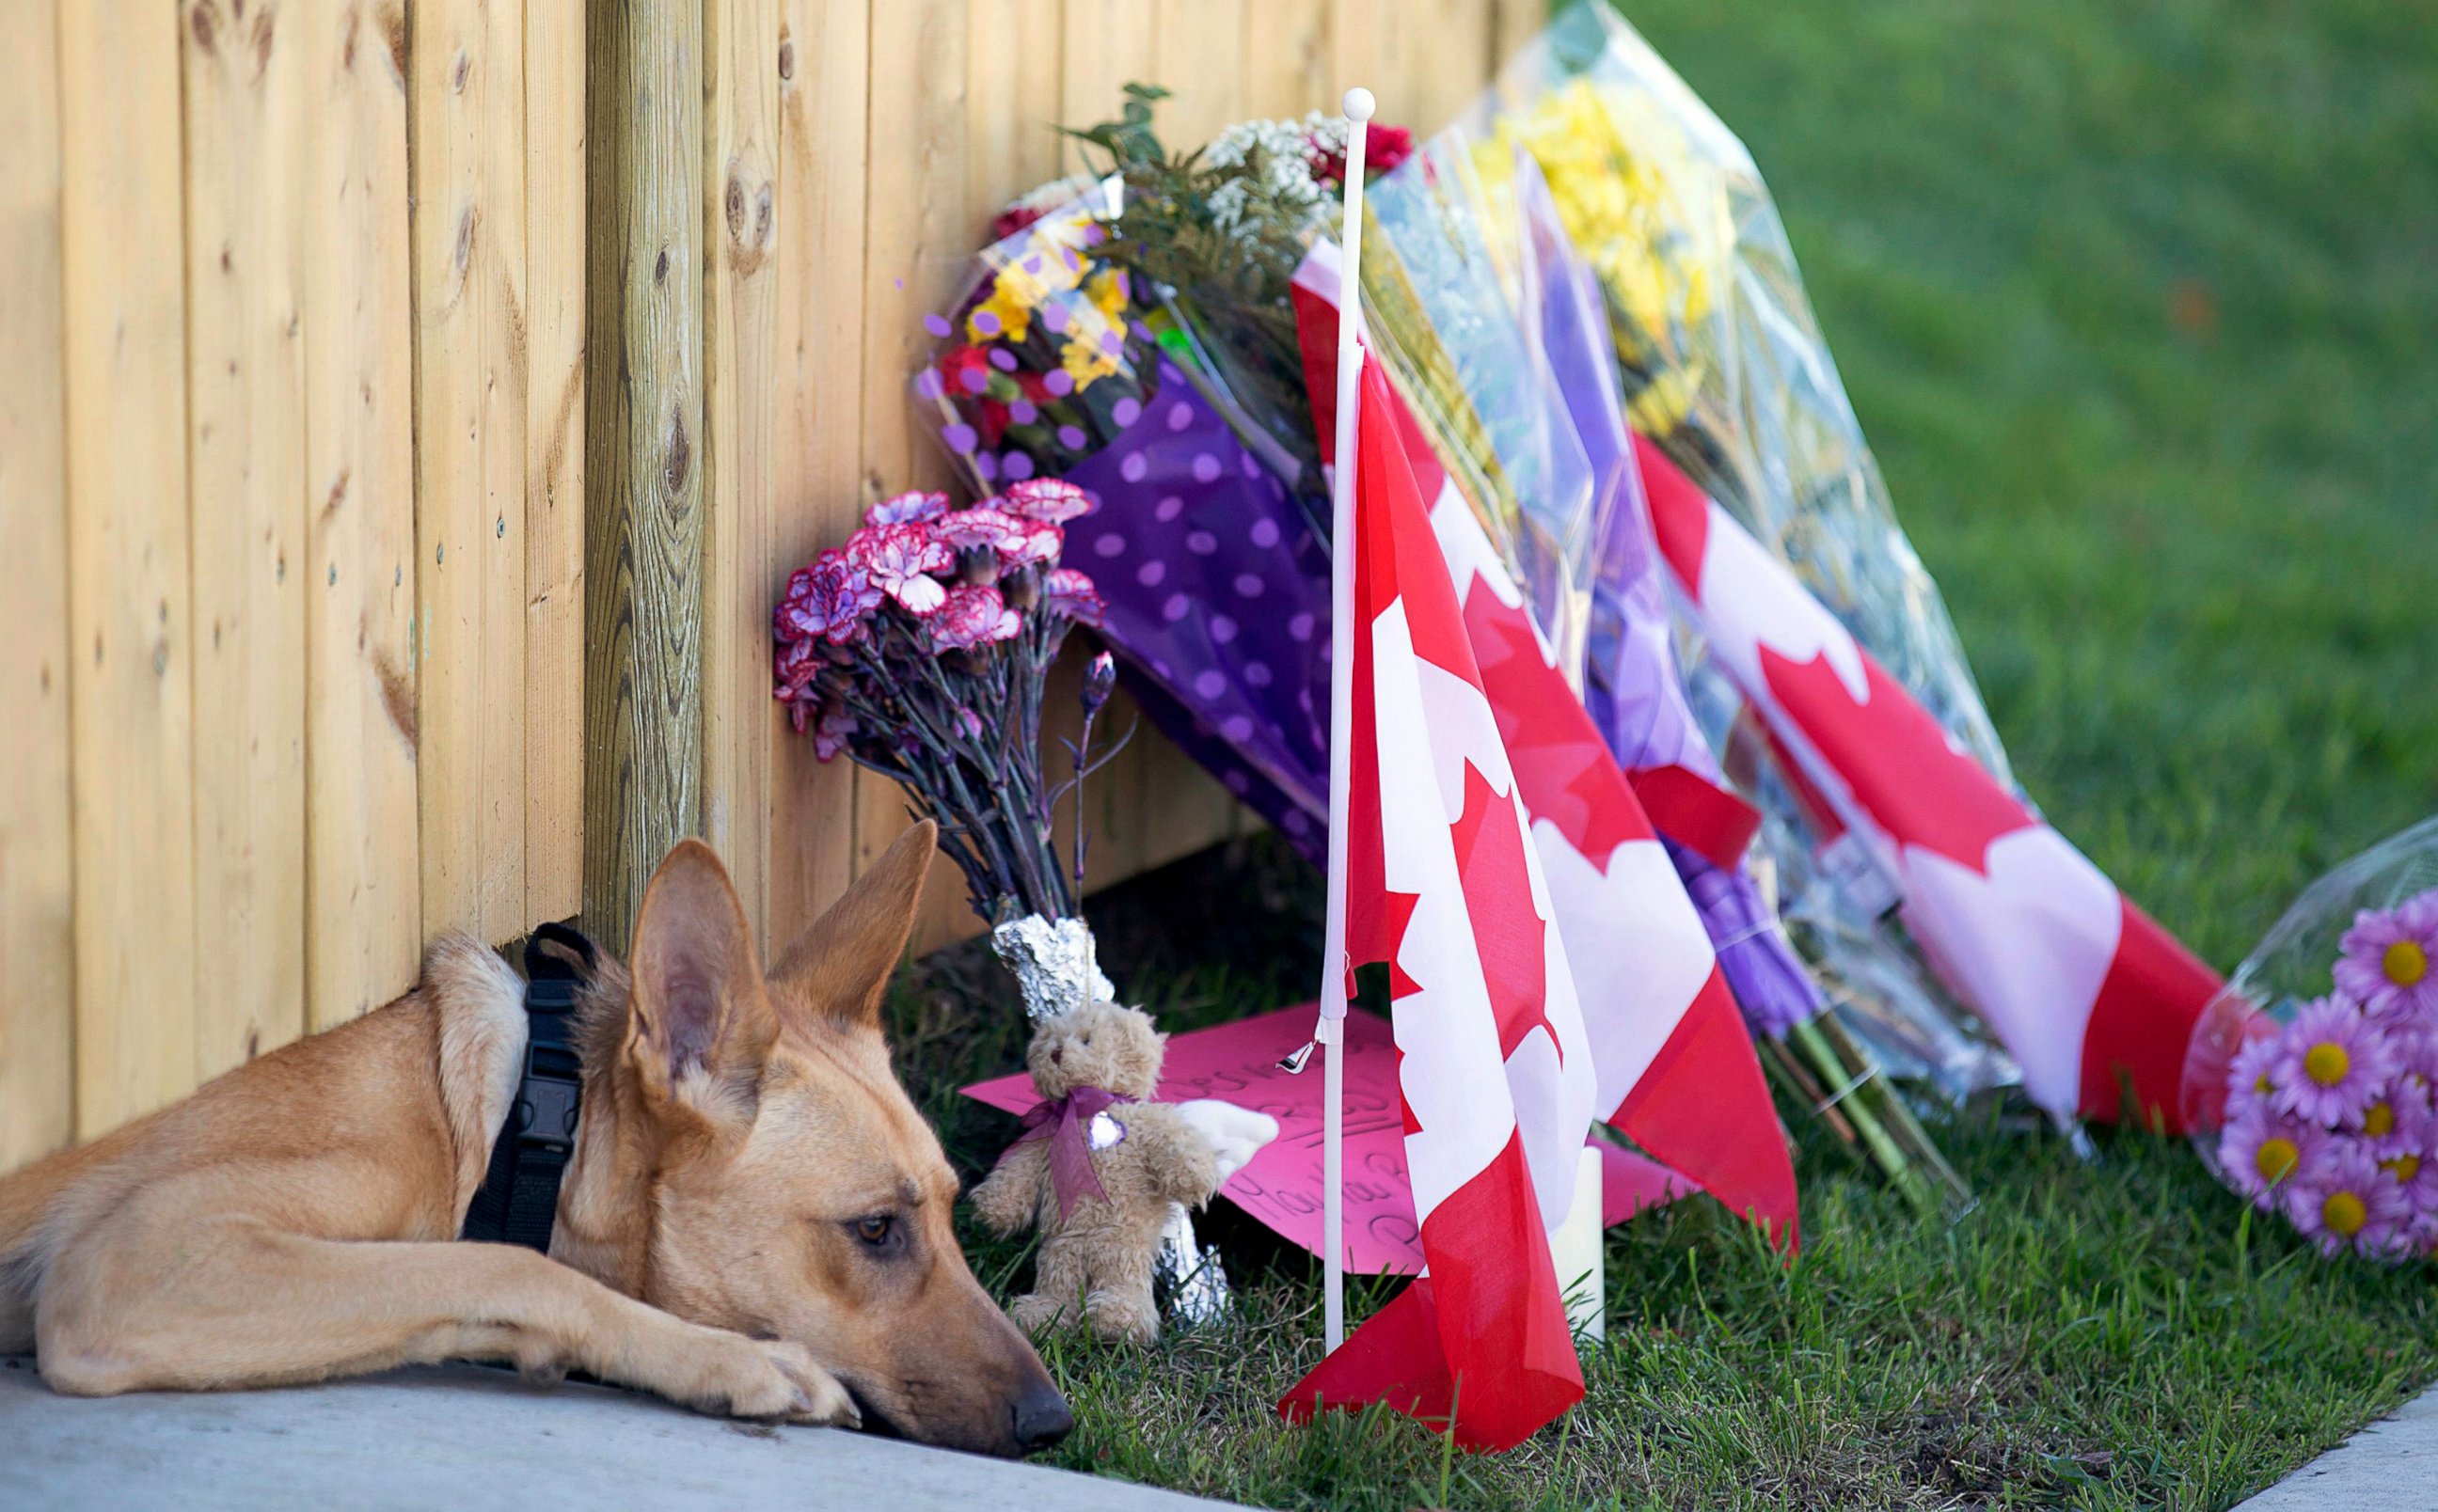 PHOTO: Dogs peek out from under a gate at the Cirillo family home in Hamilton, Ontario near flowers and flags that have been left out, Oct. 23, 2014.